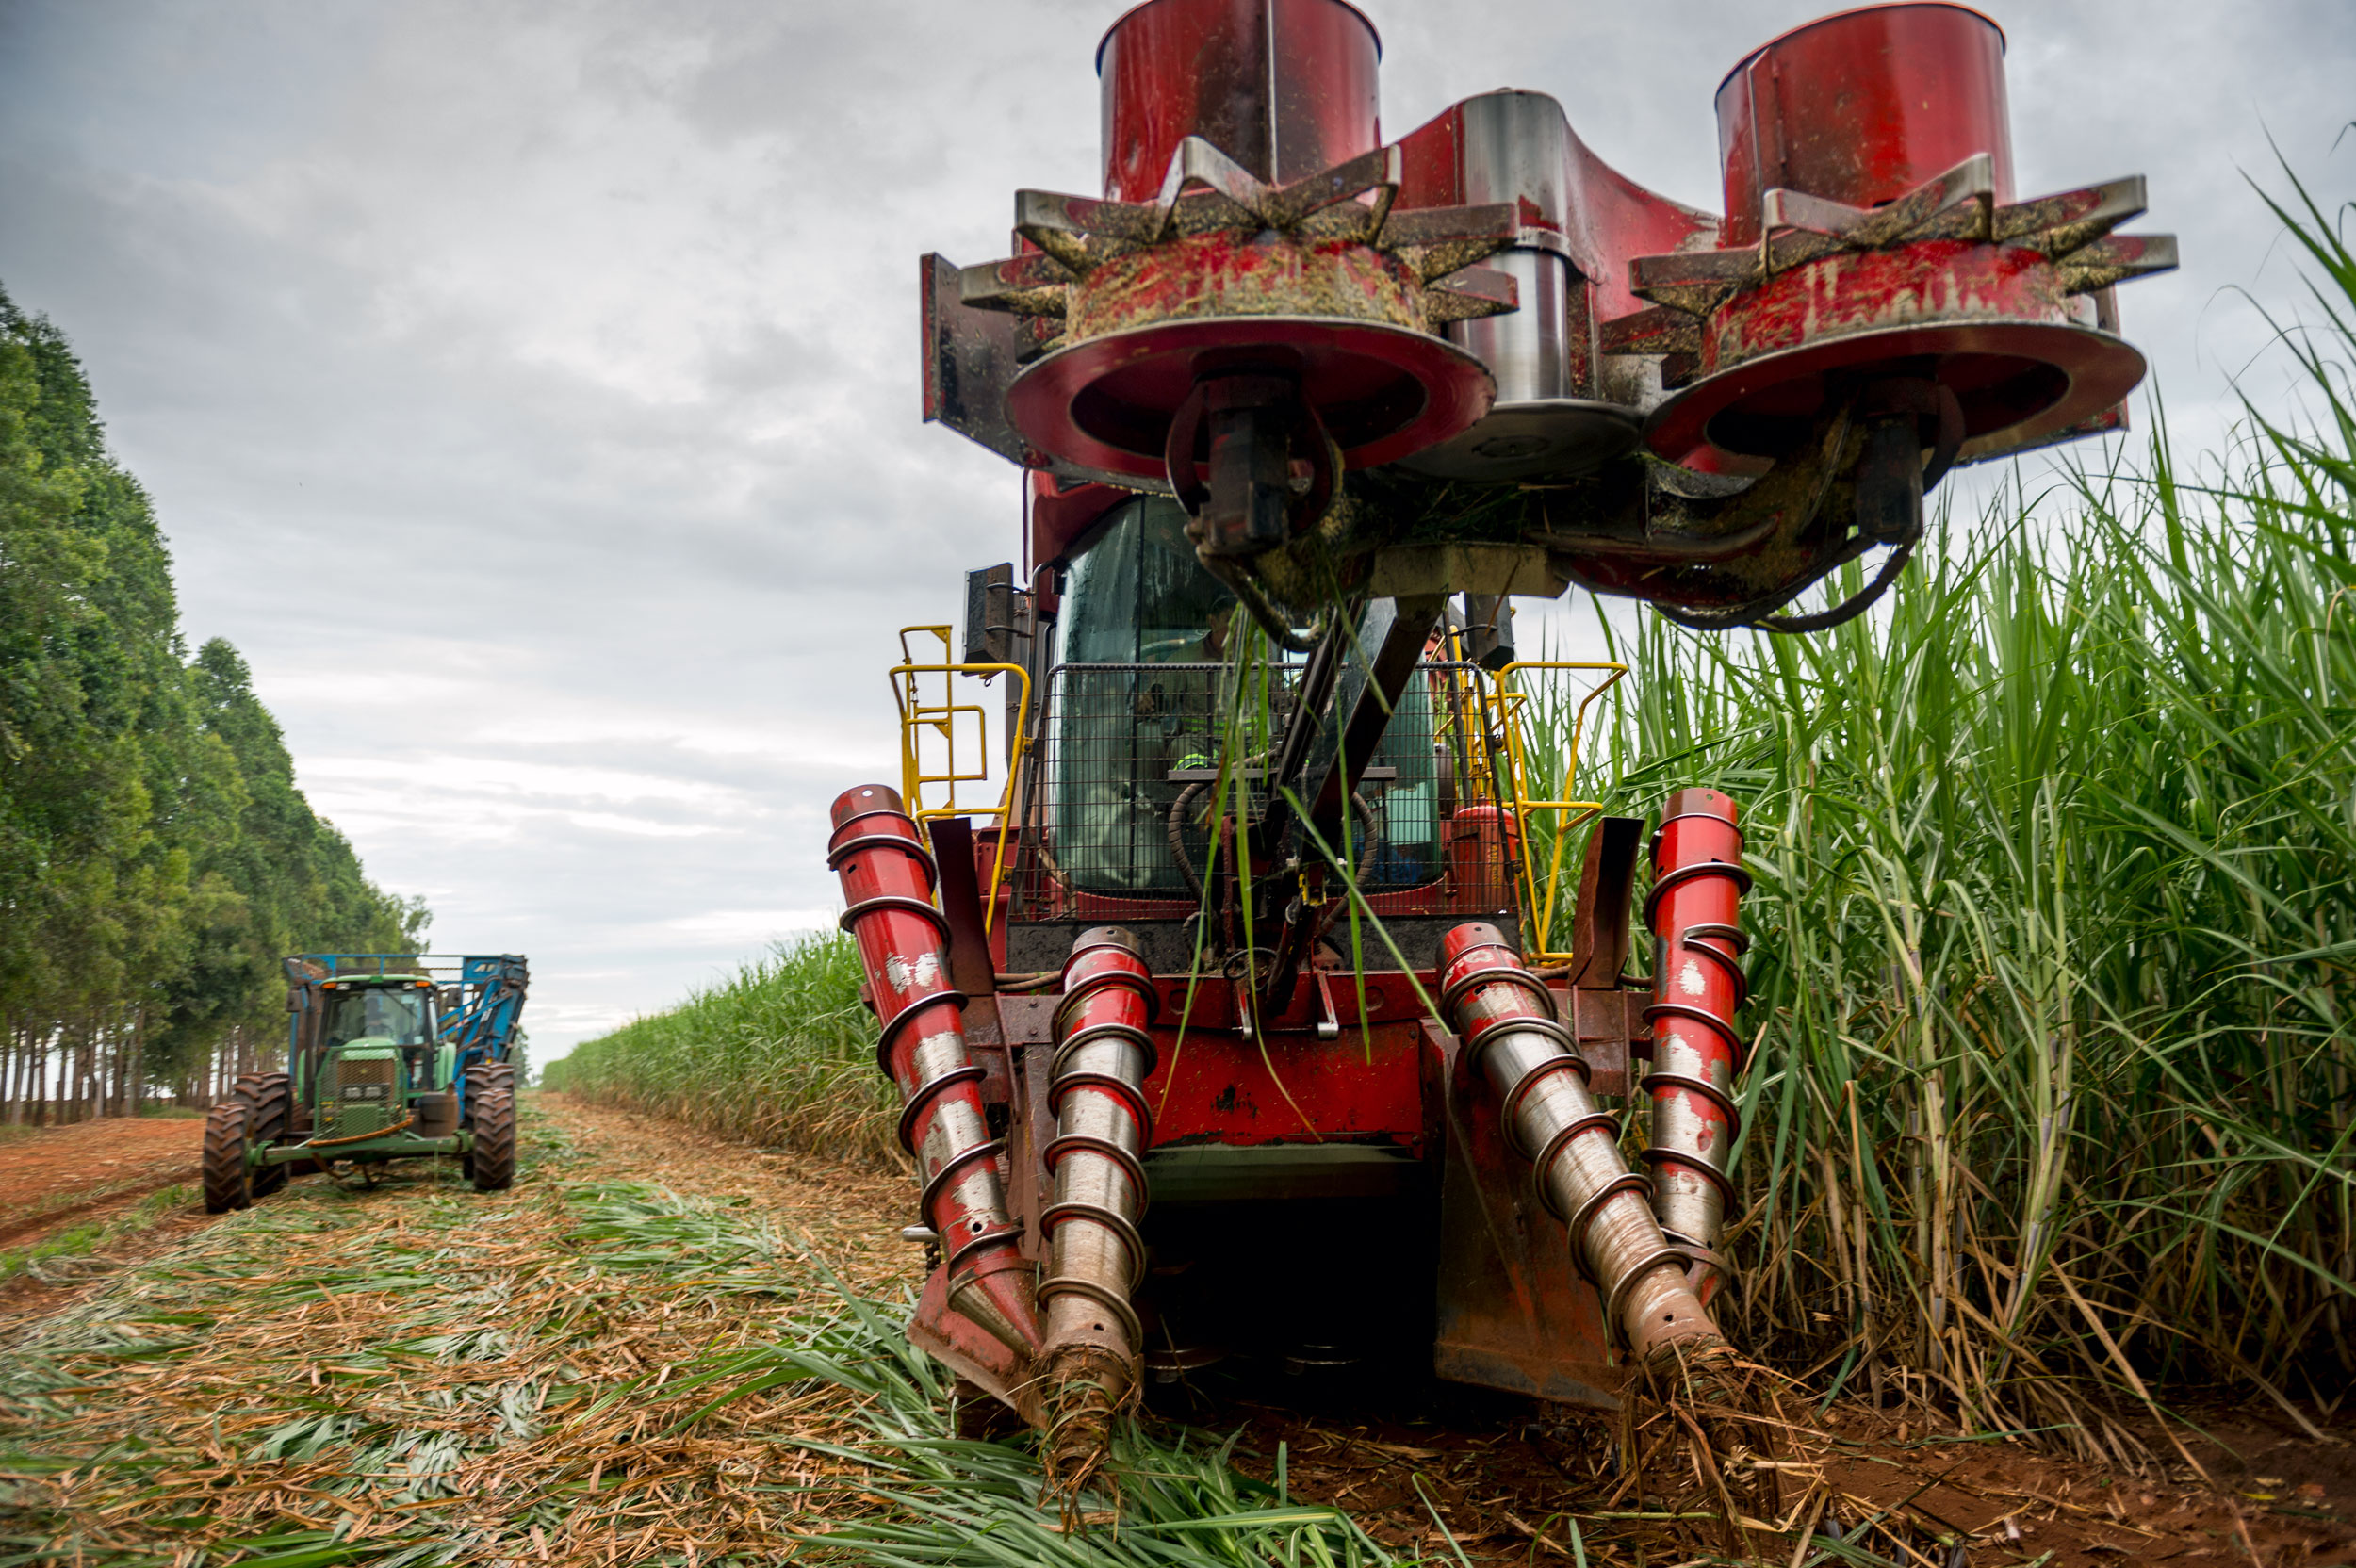 COFCO's sugar mills in Brazil produce sugar and ethanol products that are used in local and international markets